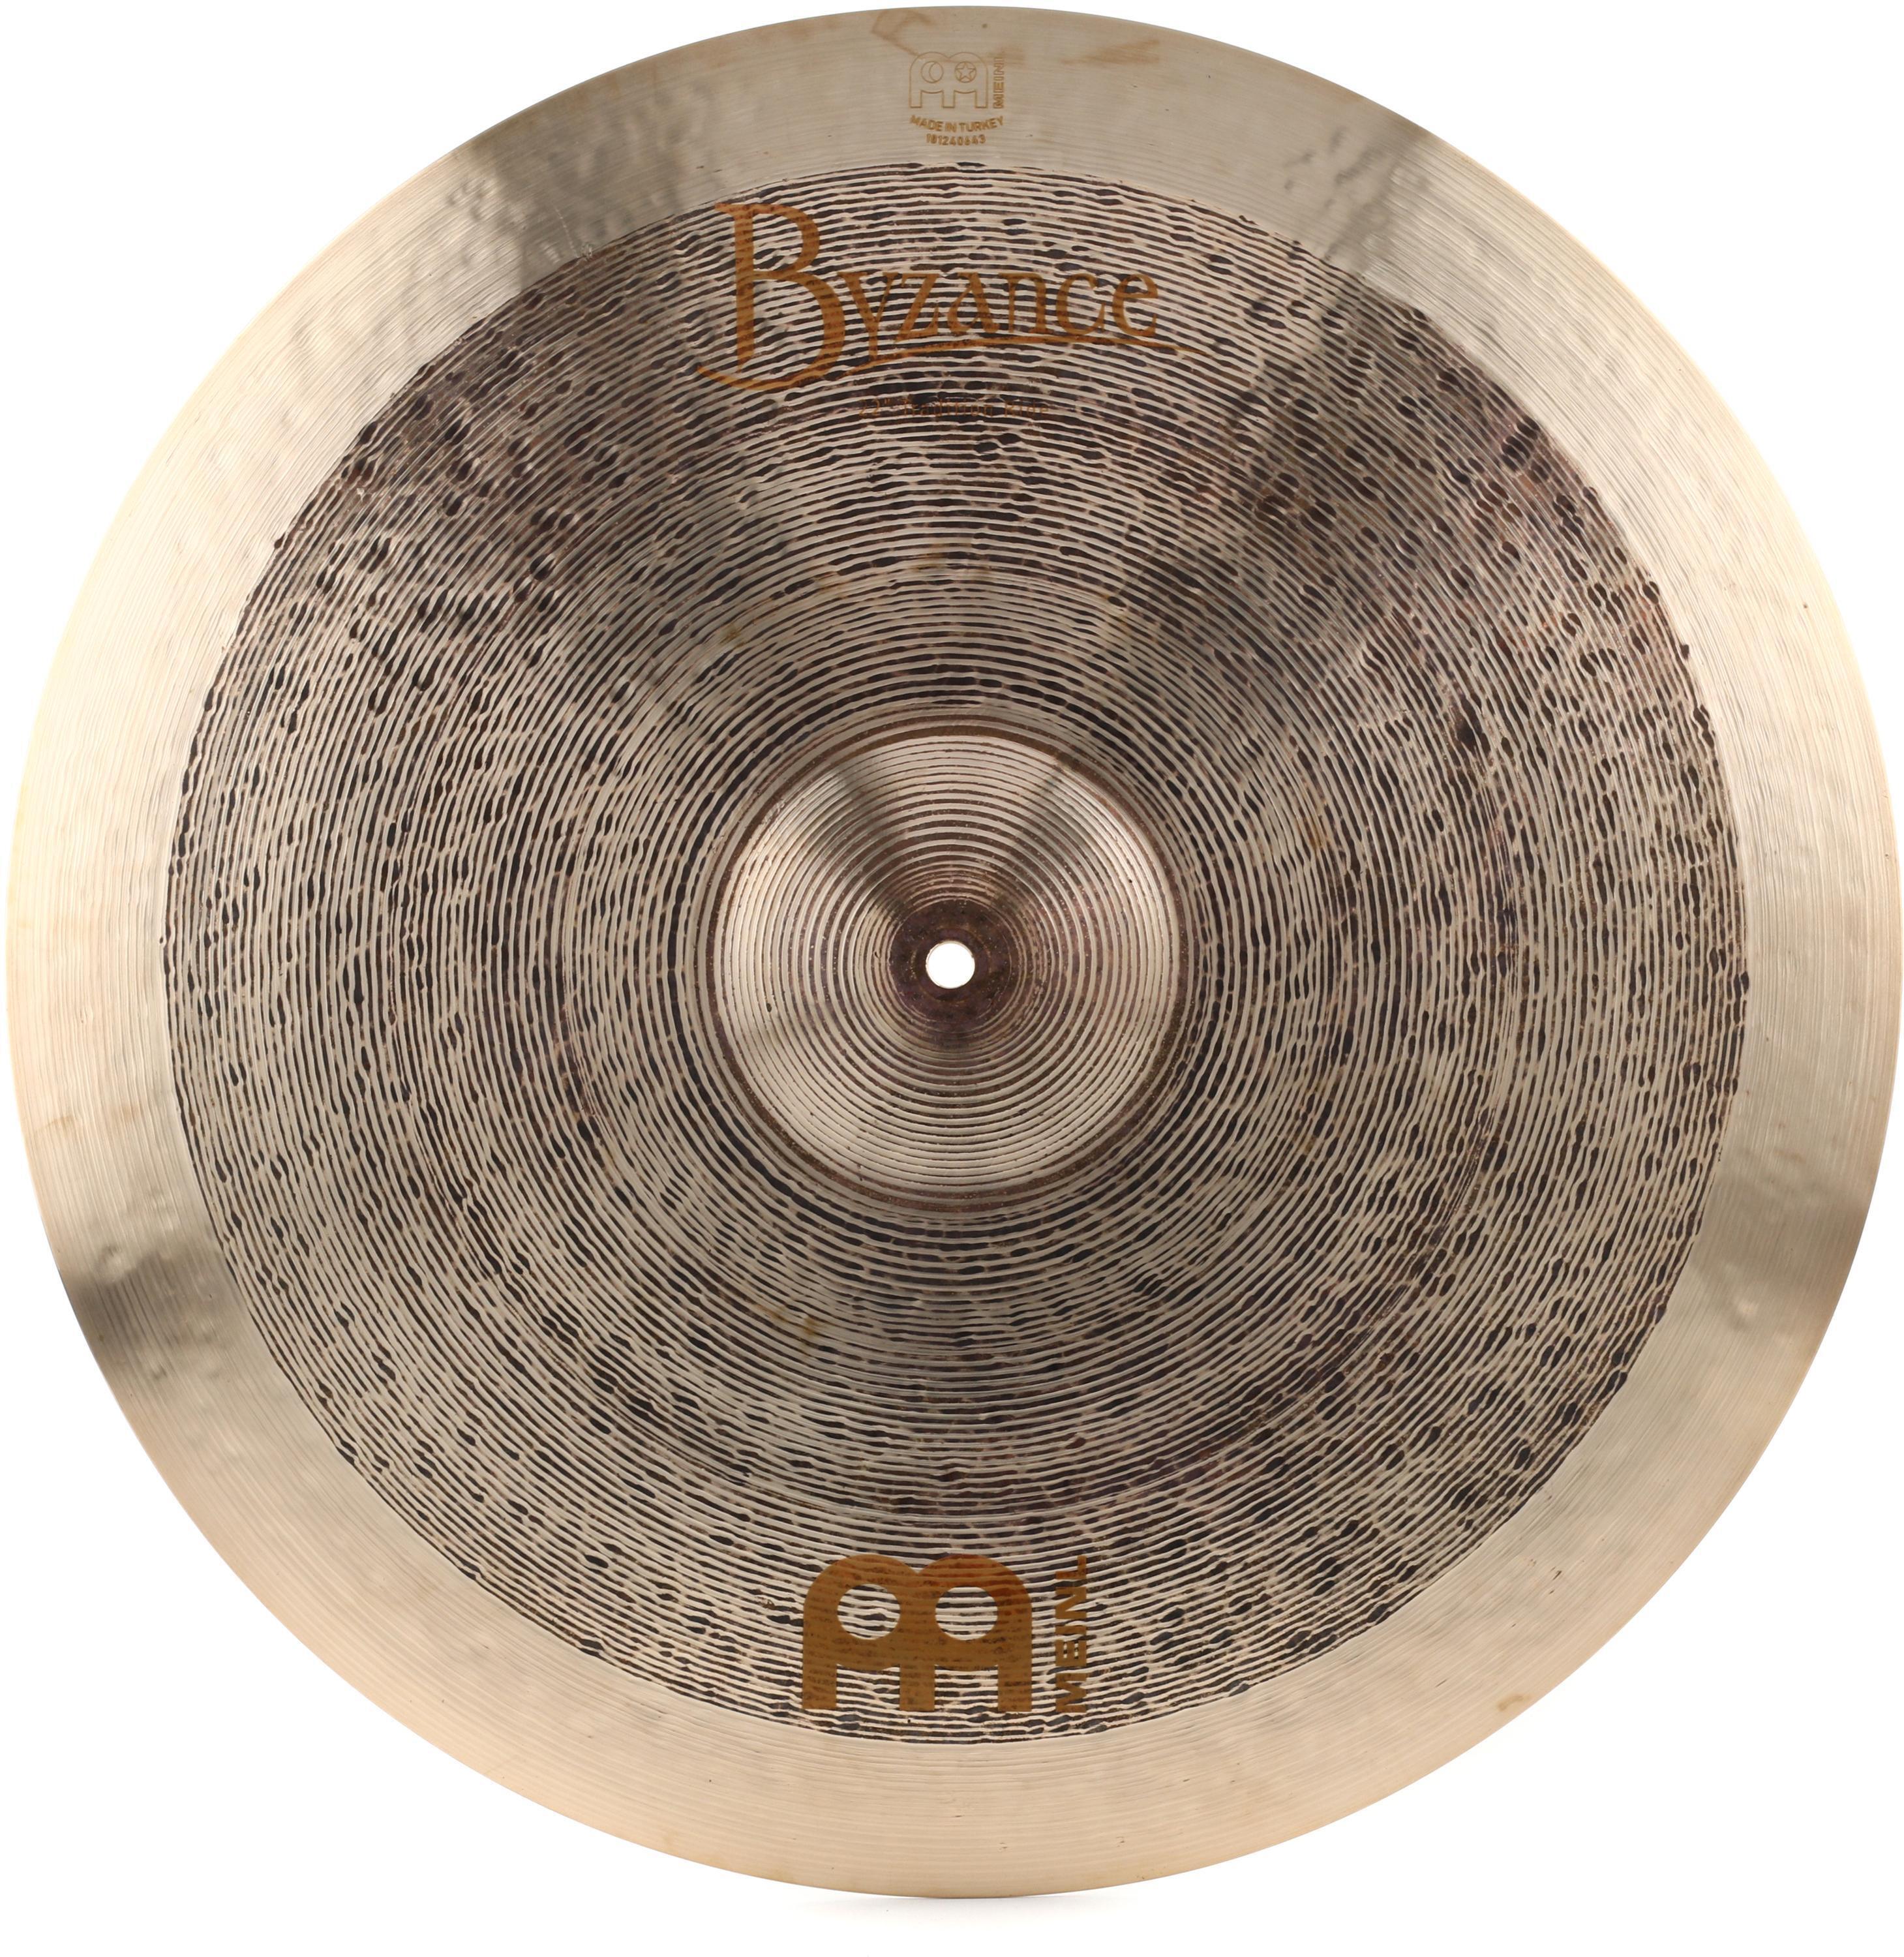 Meinl Cymbals  inch Byzance Tradition Ride Cymbal   Sweetwater